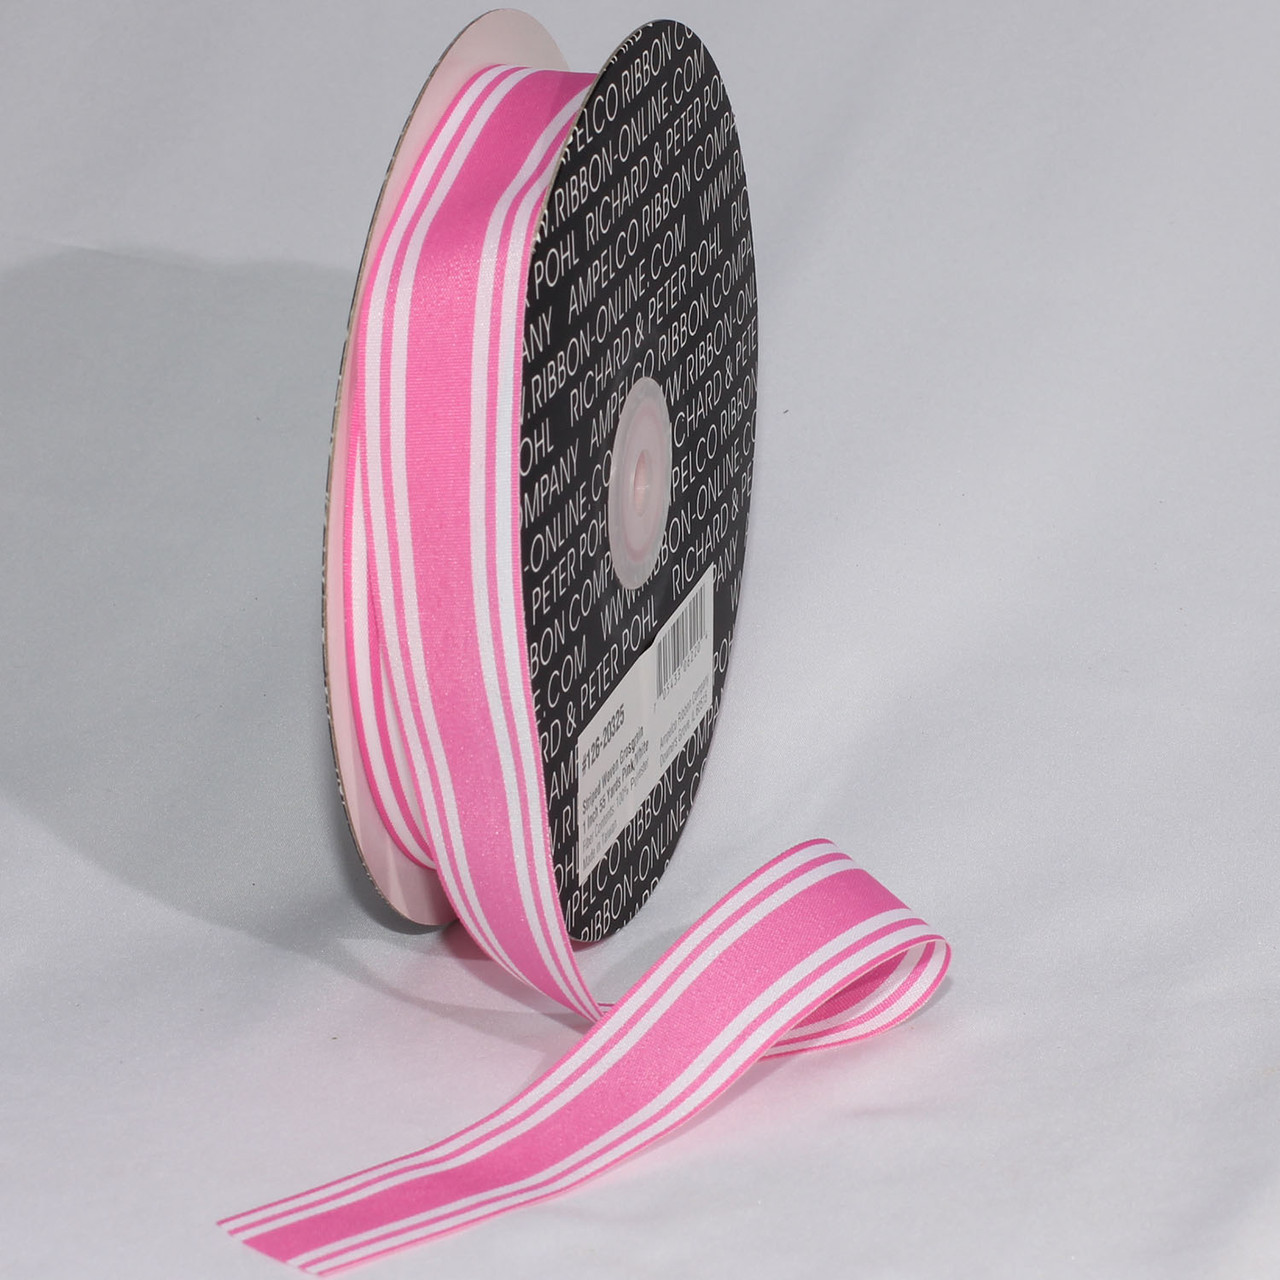 Striped Grosgrain Ribbon - Pink and White - 1 1/2 inch - 1 Yard